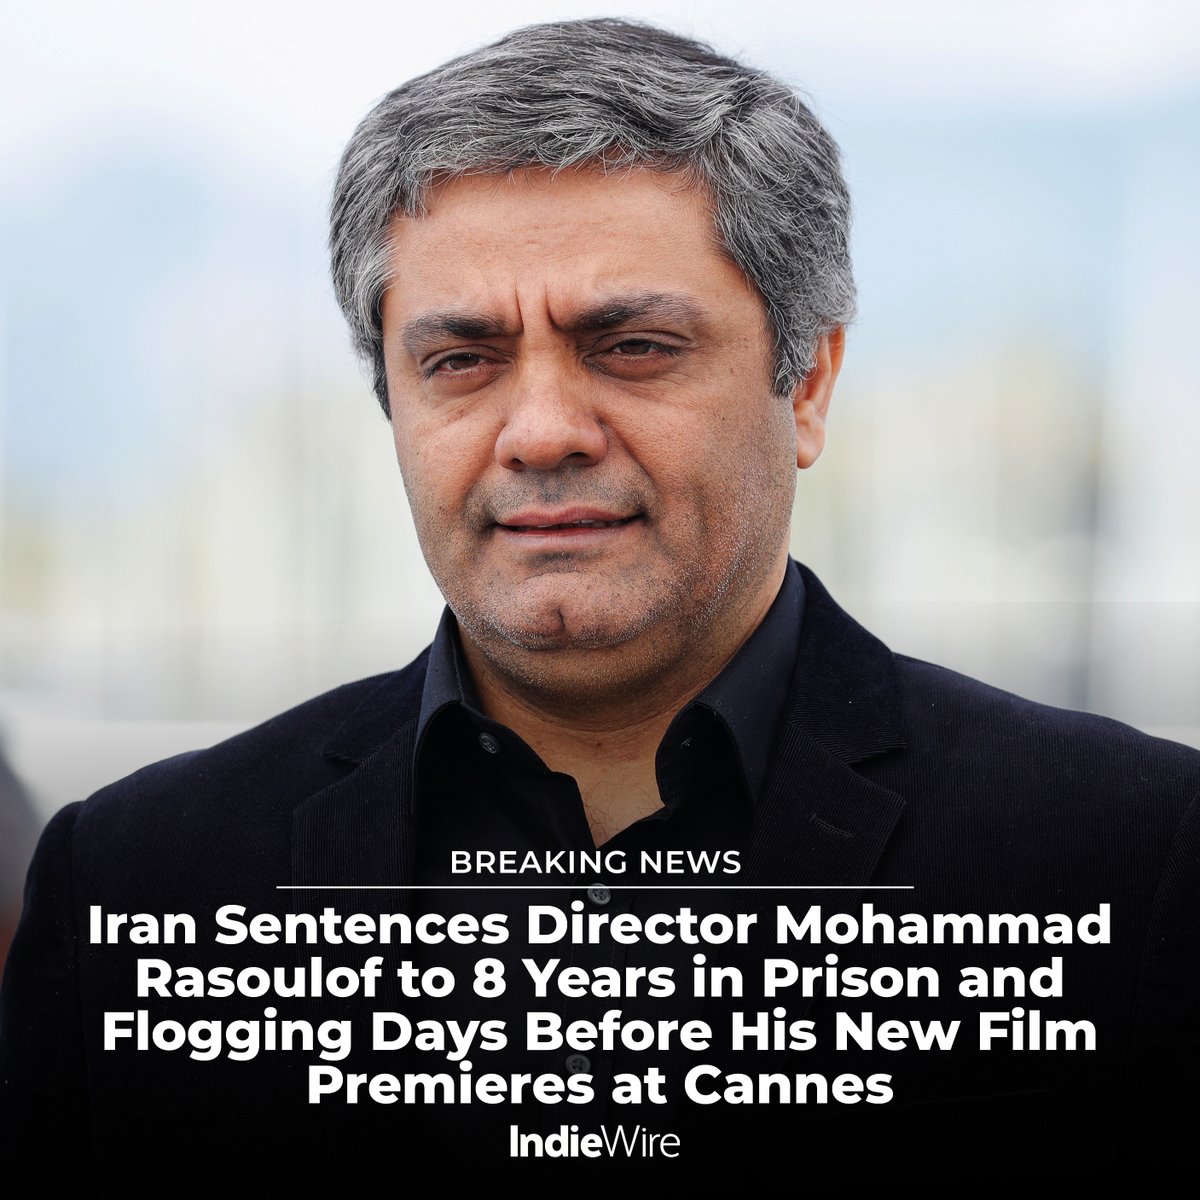 Just days before he’d premiere his new film “The Seed of the Sacred Fig” in Competition at the Cannes Film Festival, director Mohammad Rasoulof has been sentenced to eight years in prison and flogging in Iran. More details: trib.al/aQyWEMB